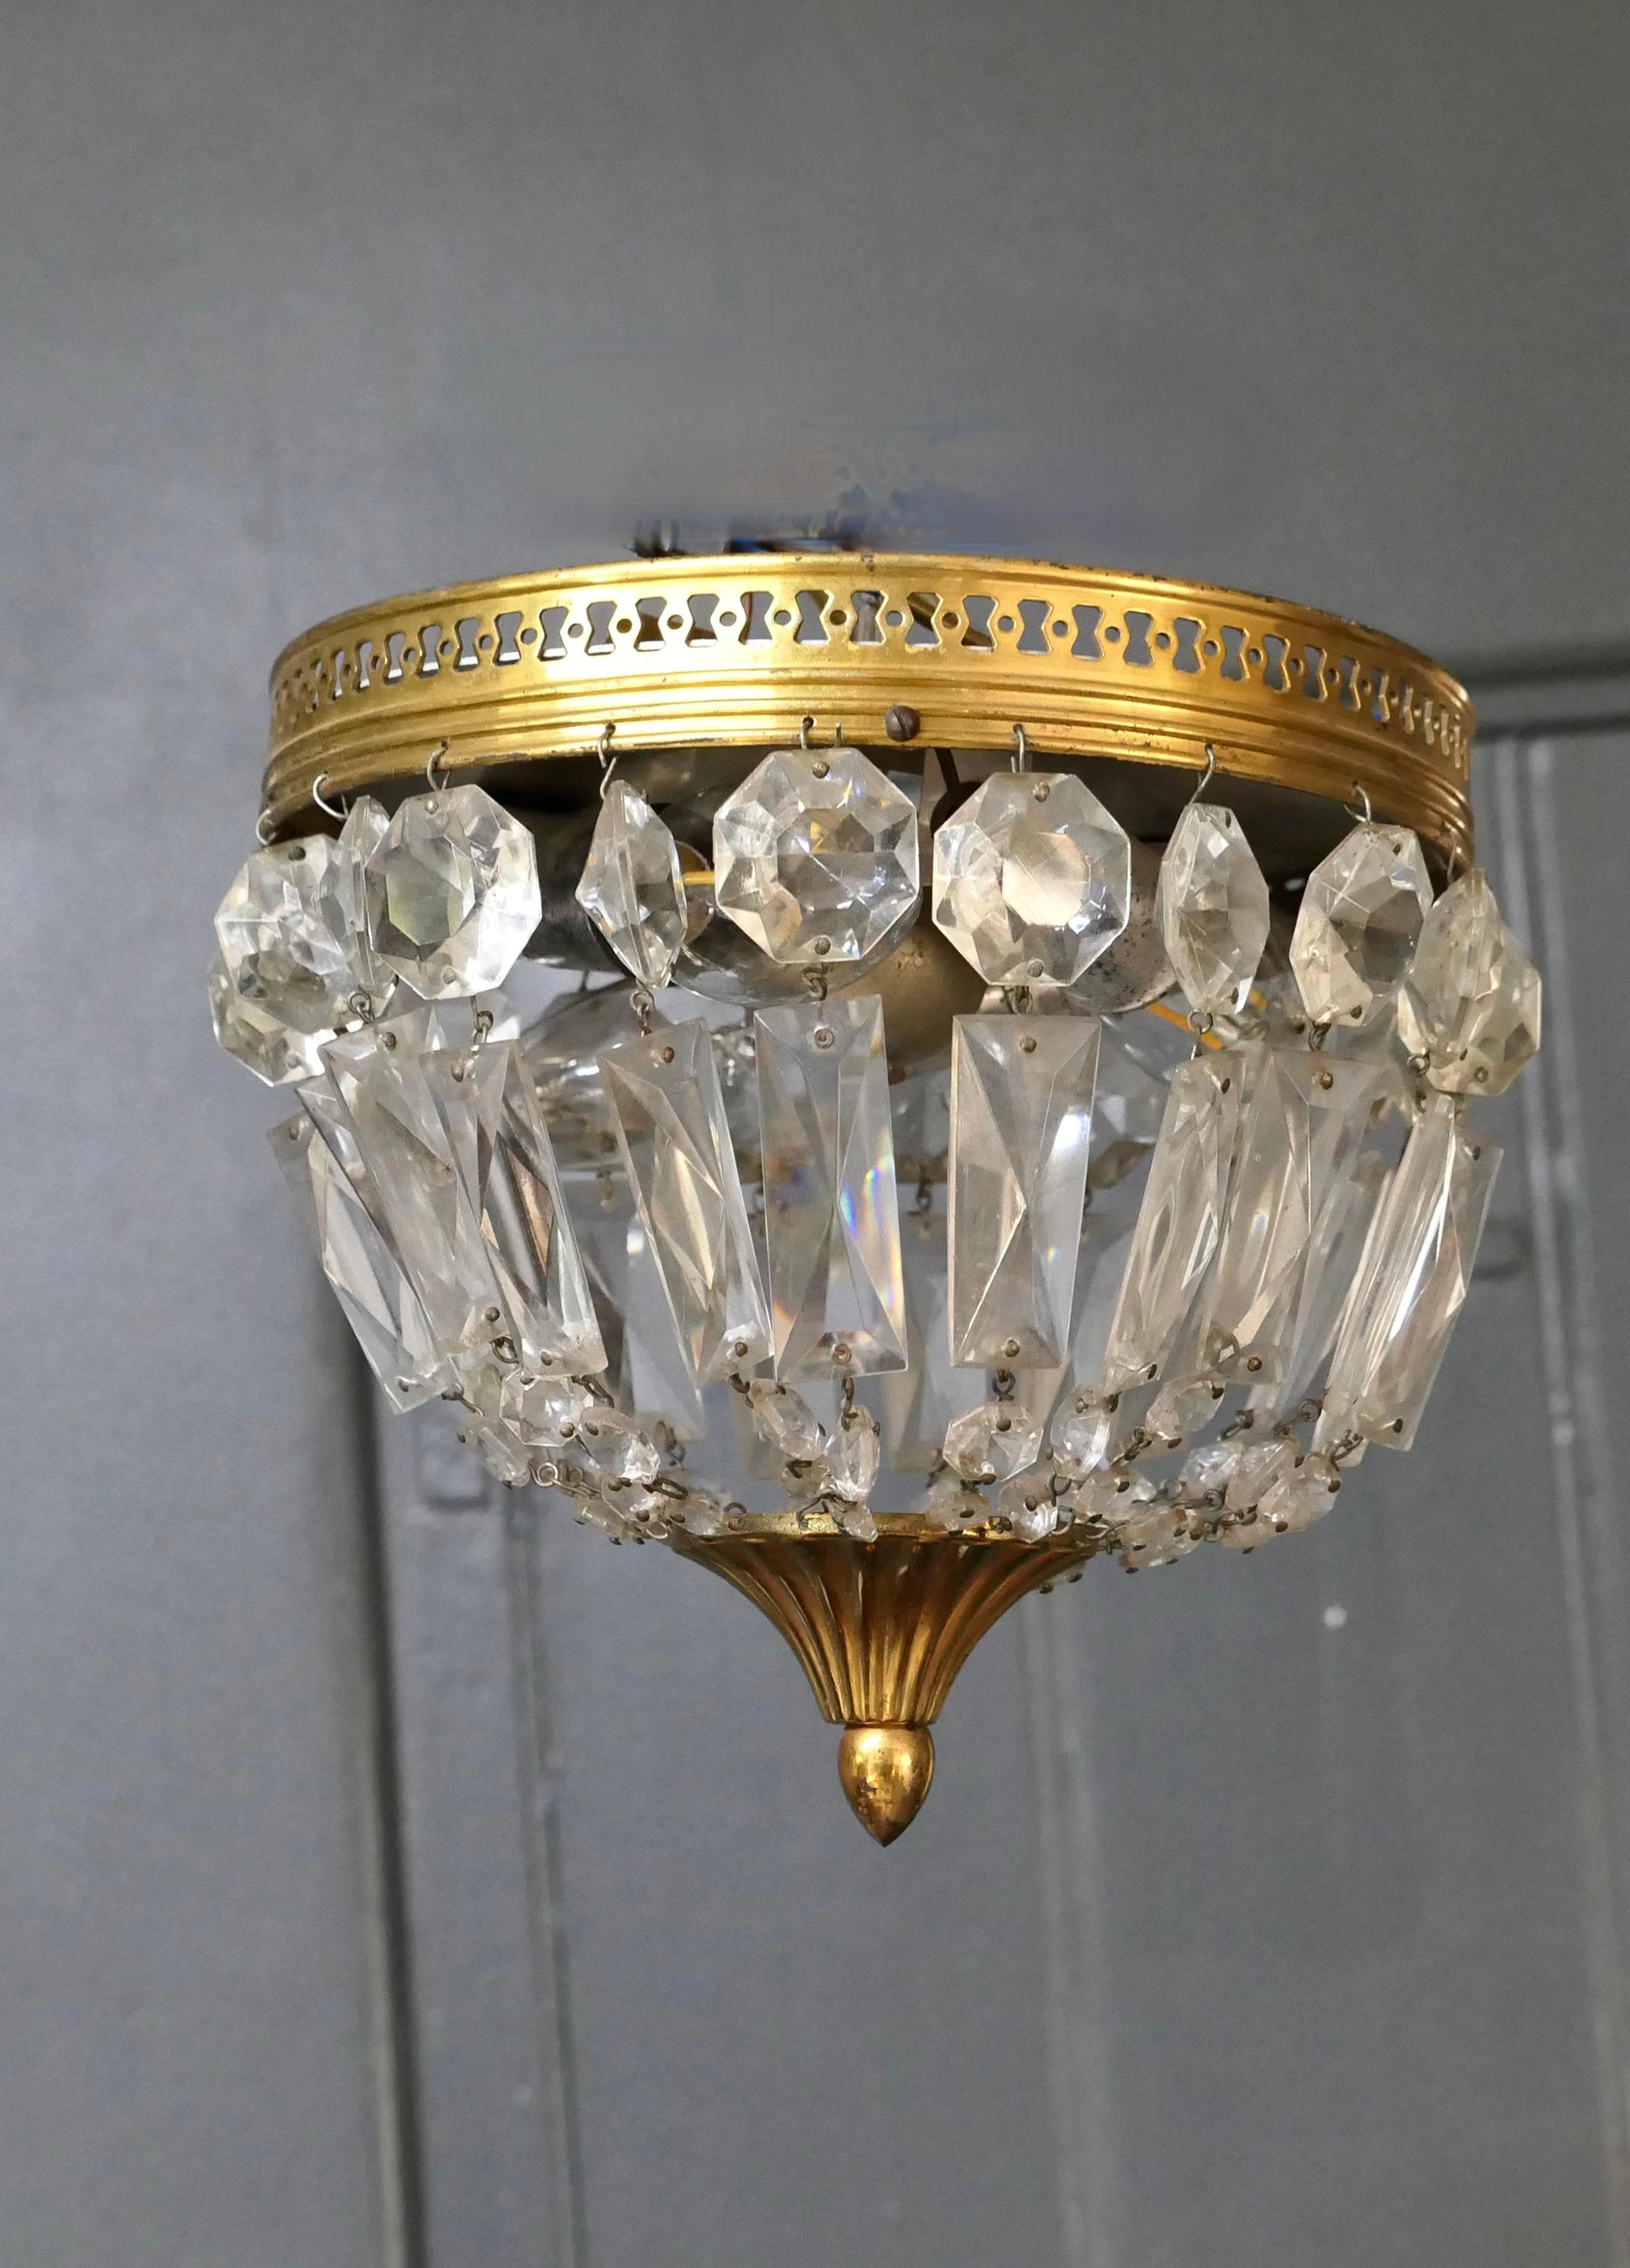 French Provincial Petite French Empire Style Crystal Basket Chandelier For Sale